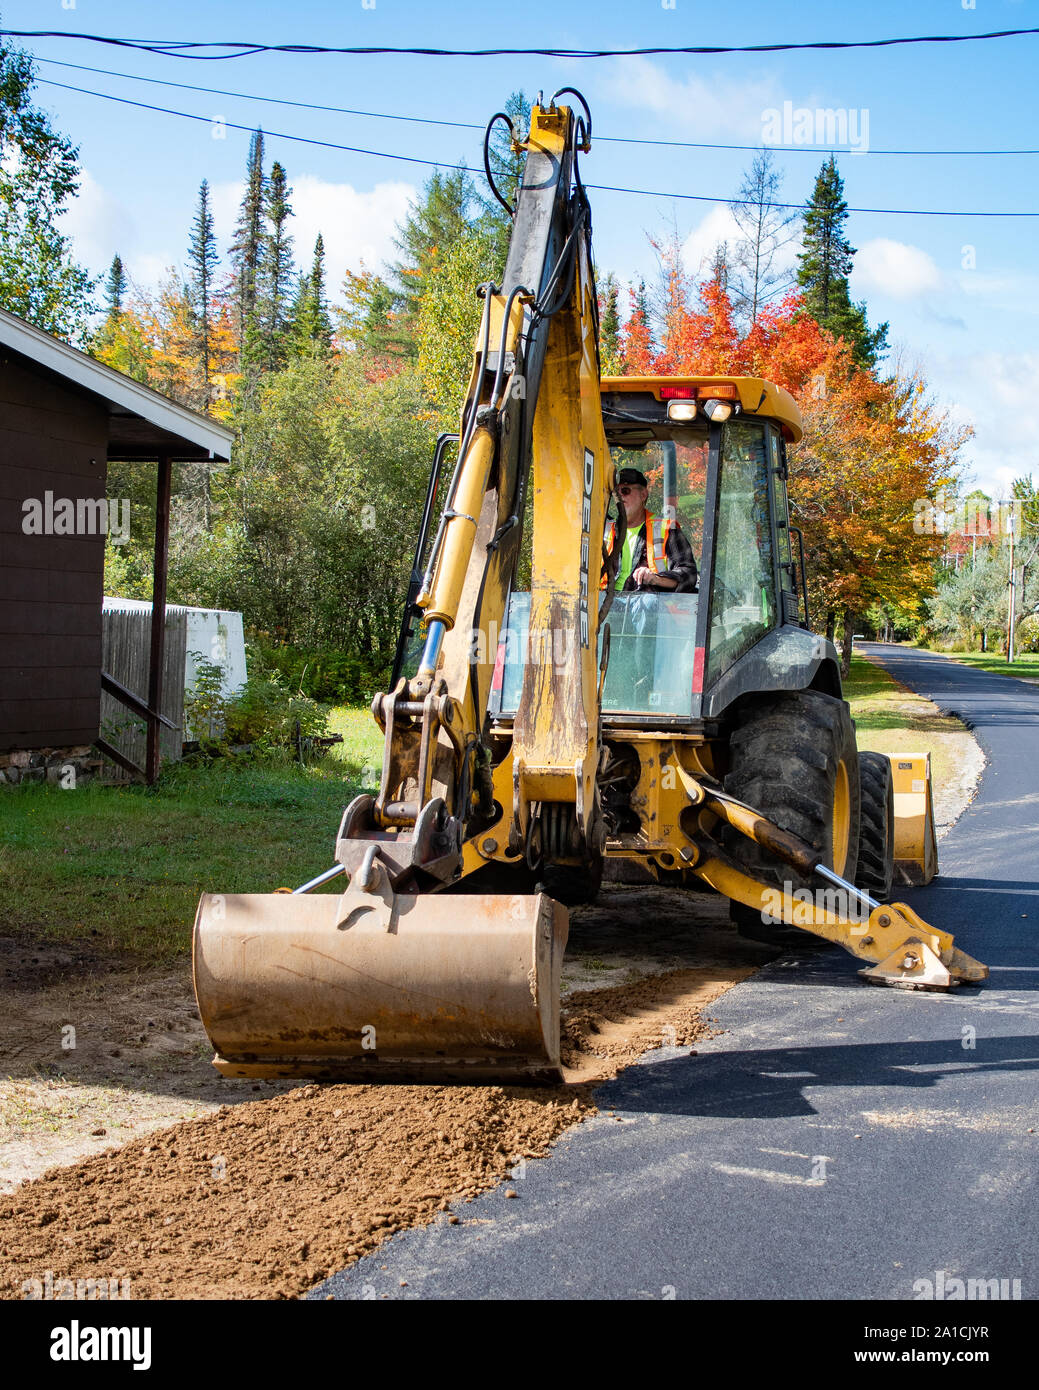 A wheeled backhoe excavator working on smoothing the shoulder and edges of a village street in Speculator, NY USA Stock Photo